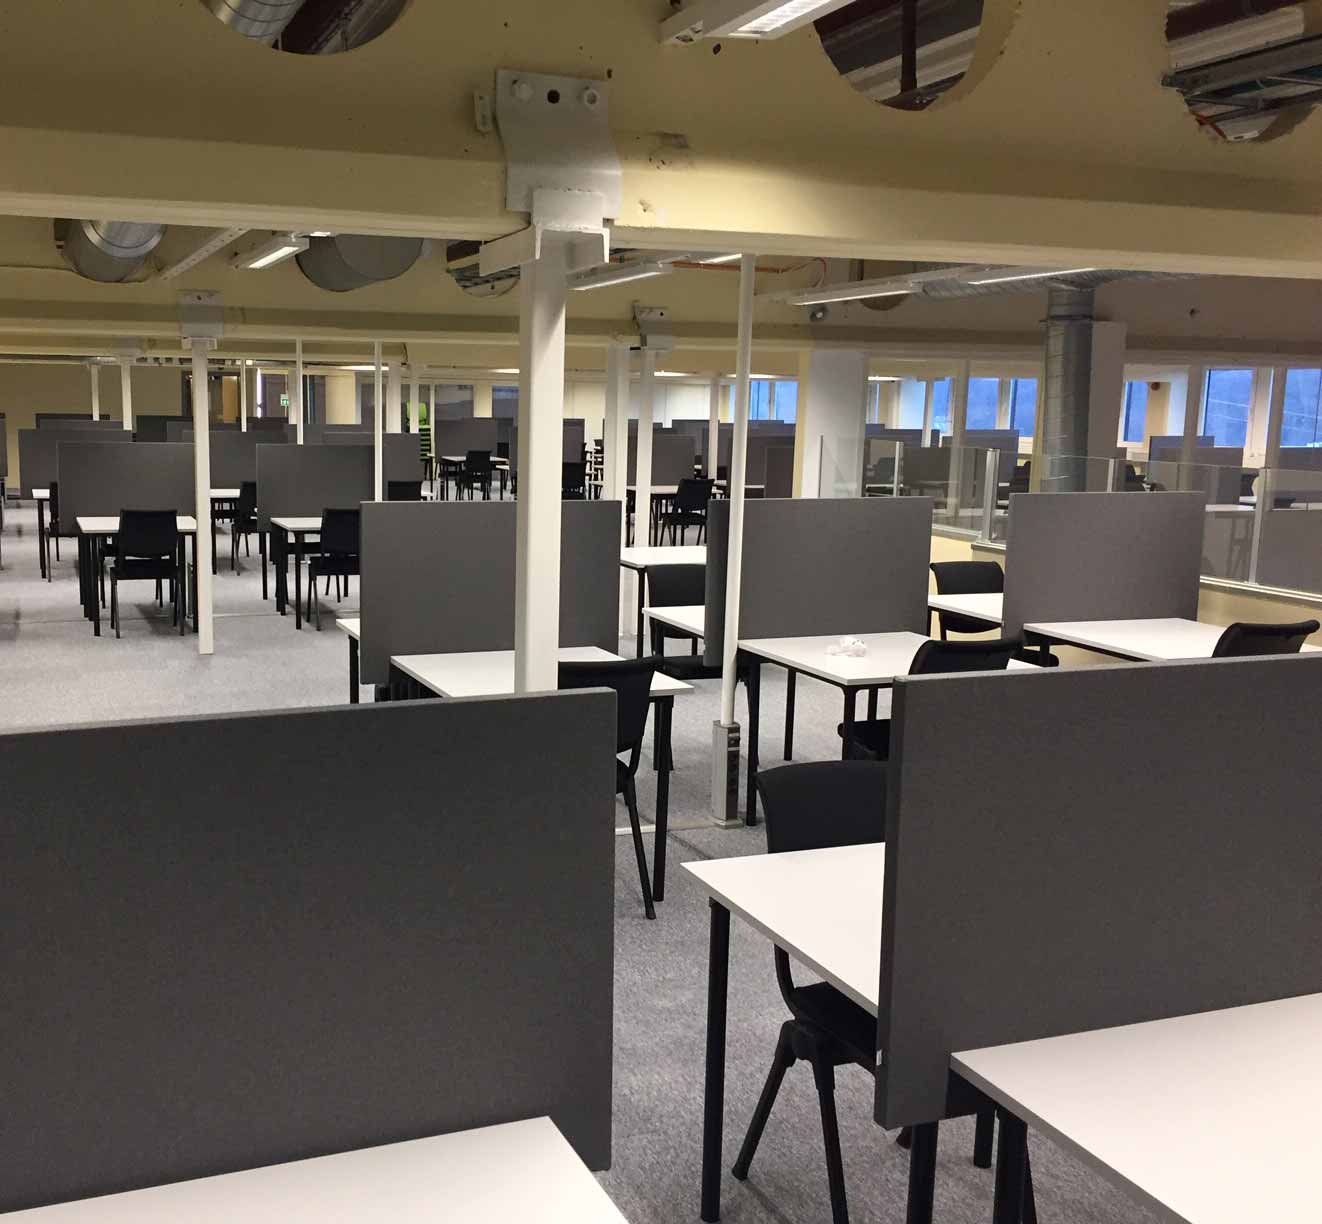 furniture arranged for exams at university